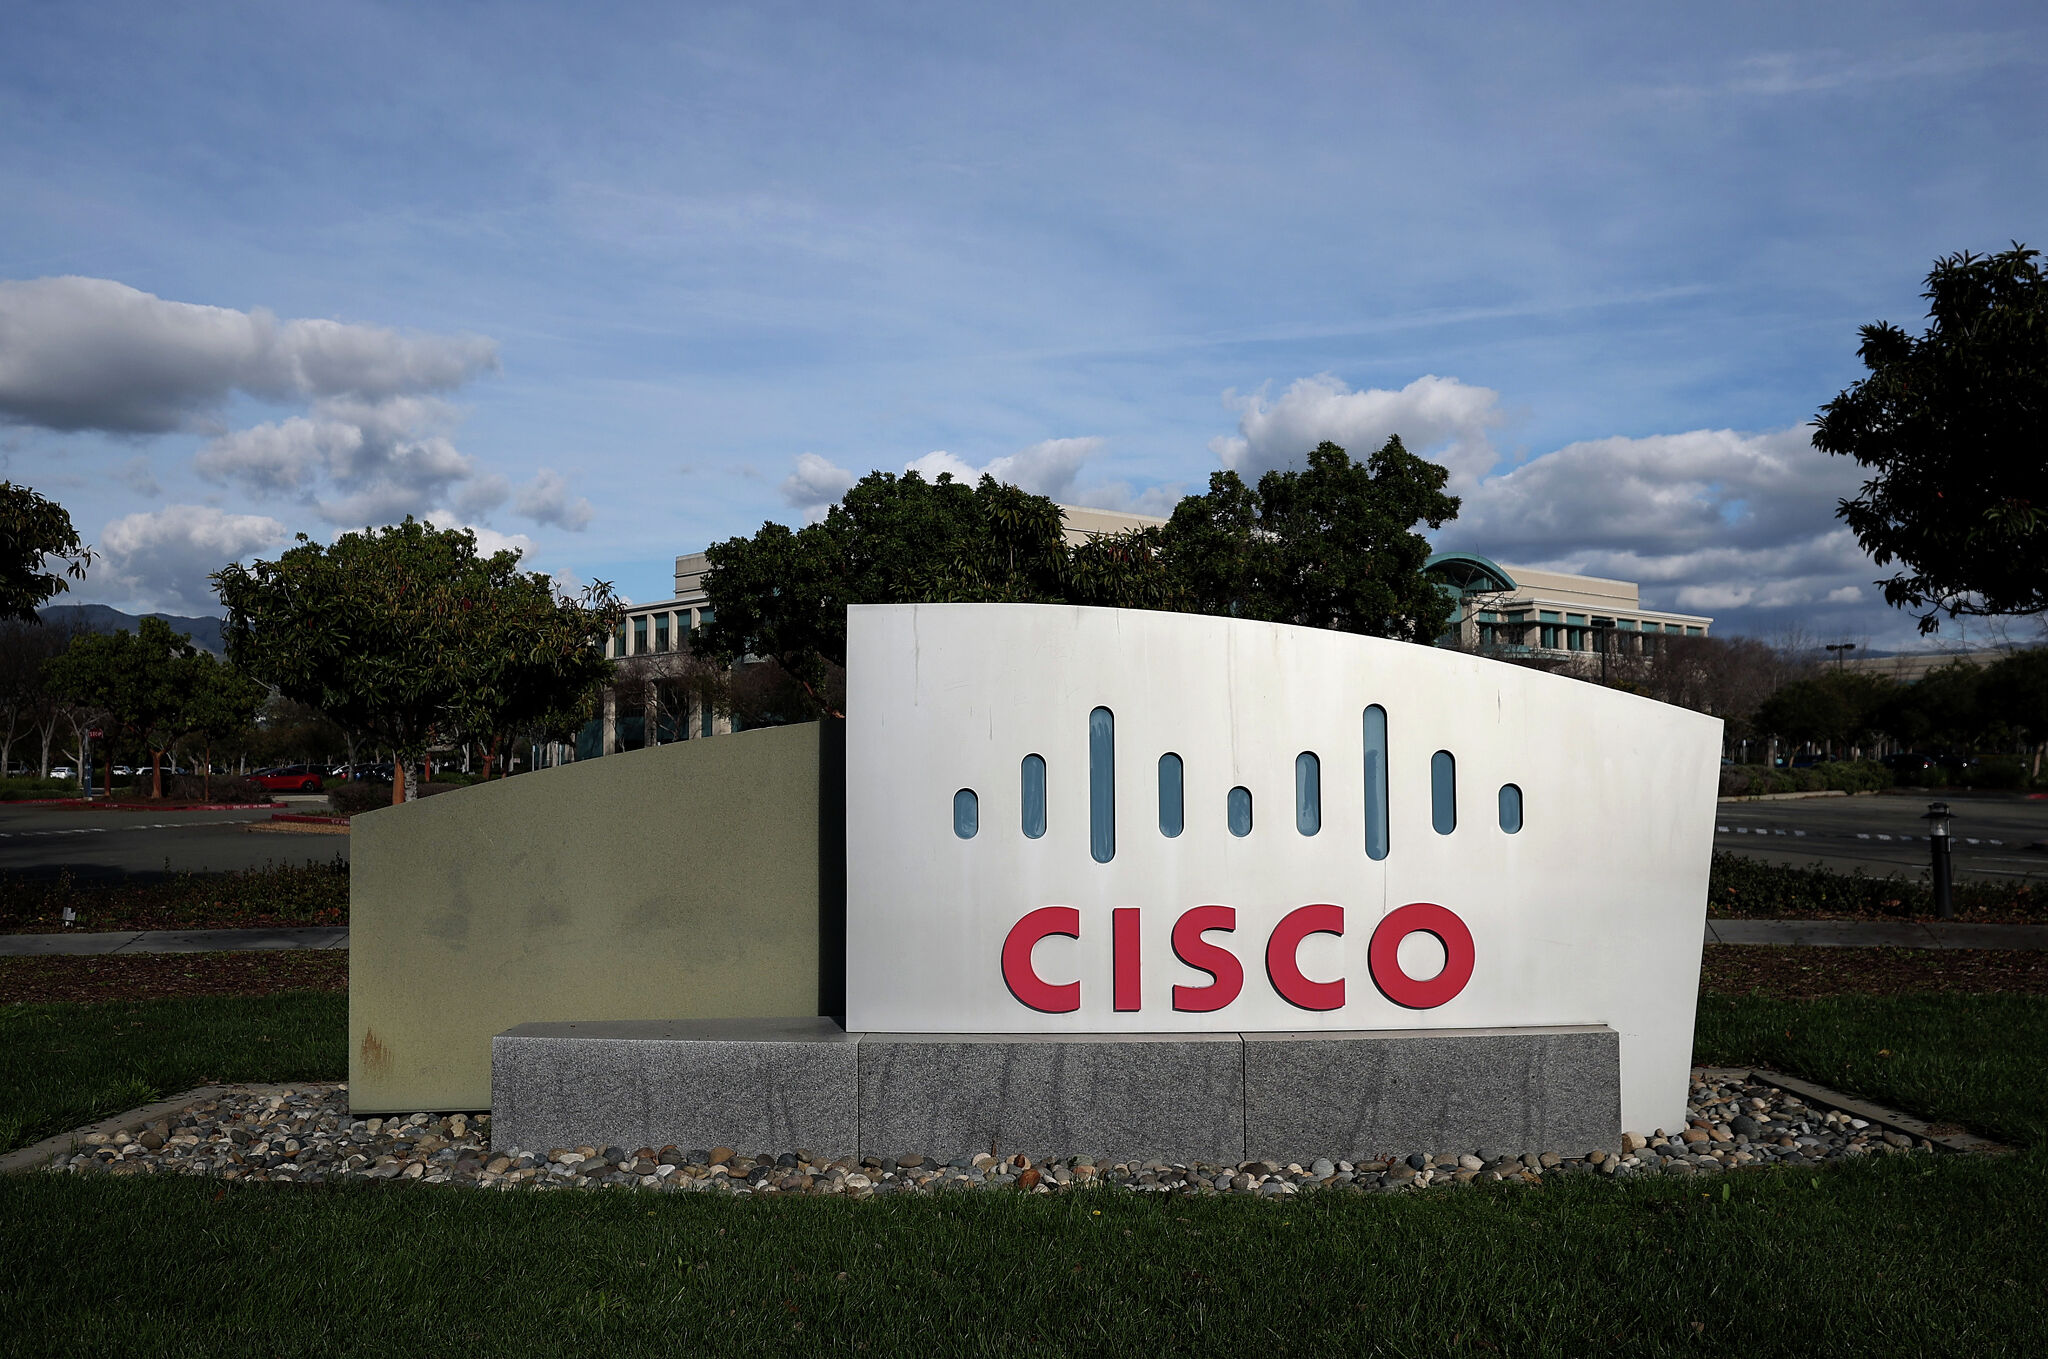 bay area tech giant cisco will lay off more than 4,000 in 5% staff cut